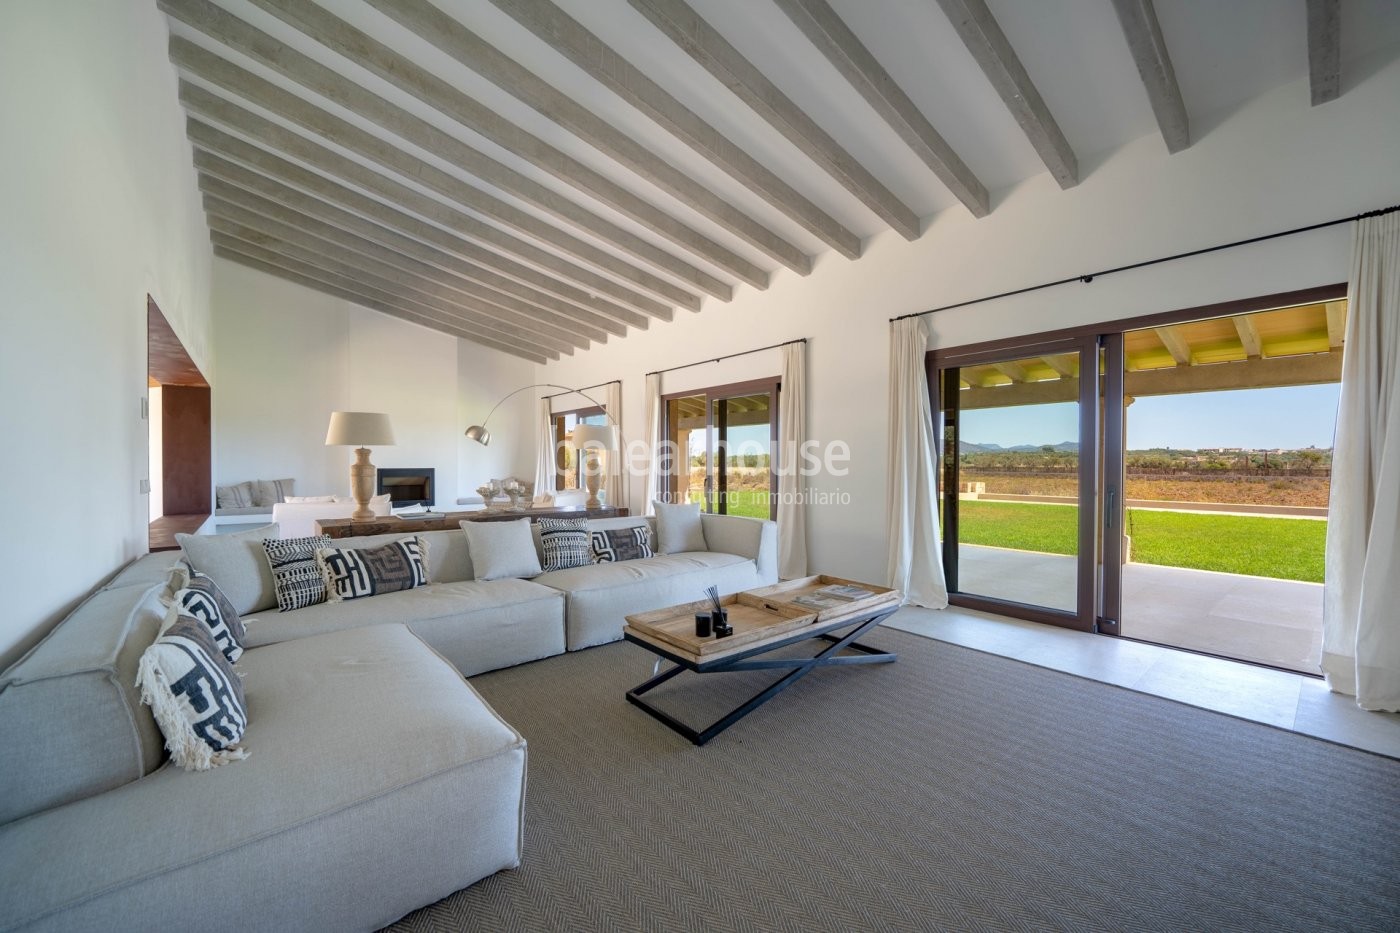 Incredible newly built rustic finca surrounded by porches and terraces close to beautiful beaches.